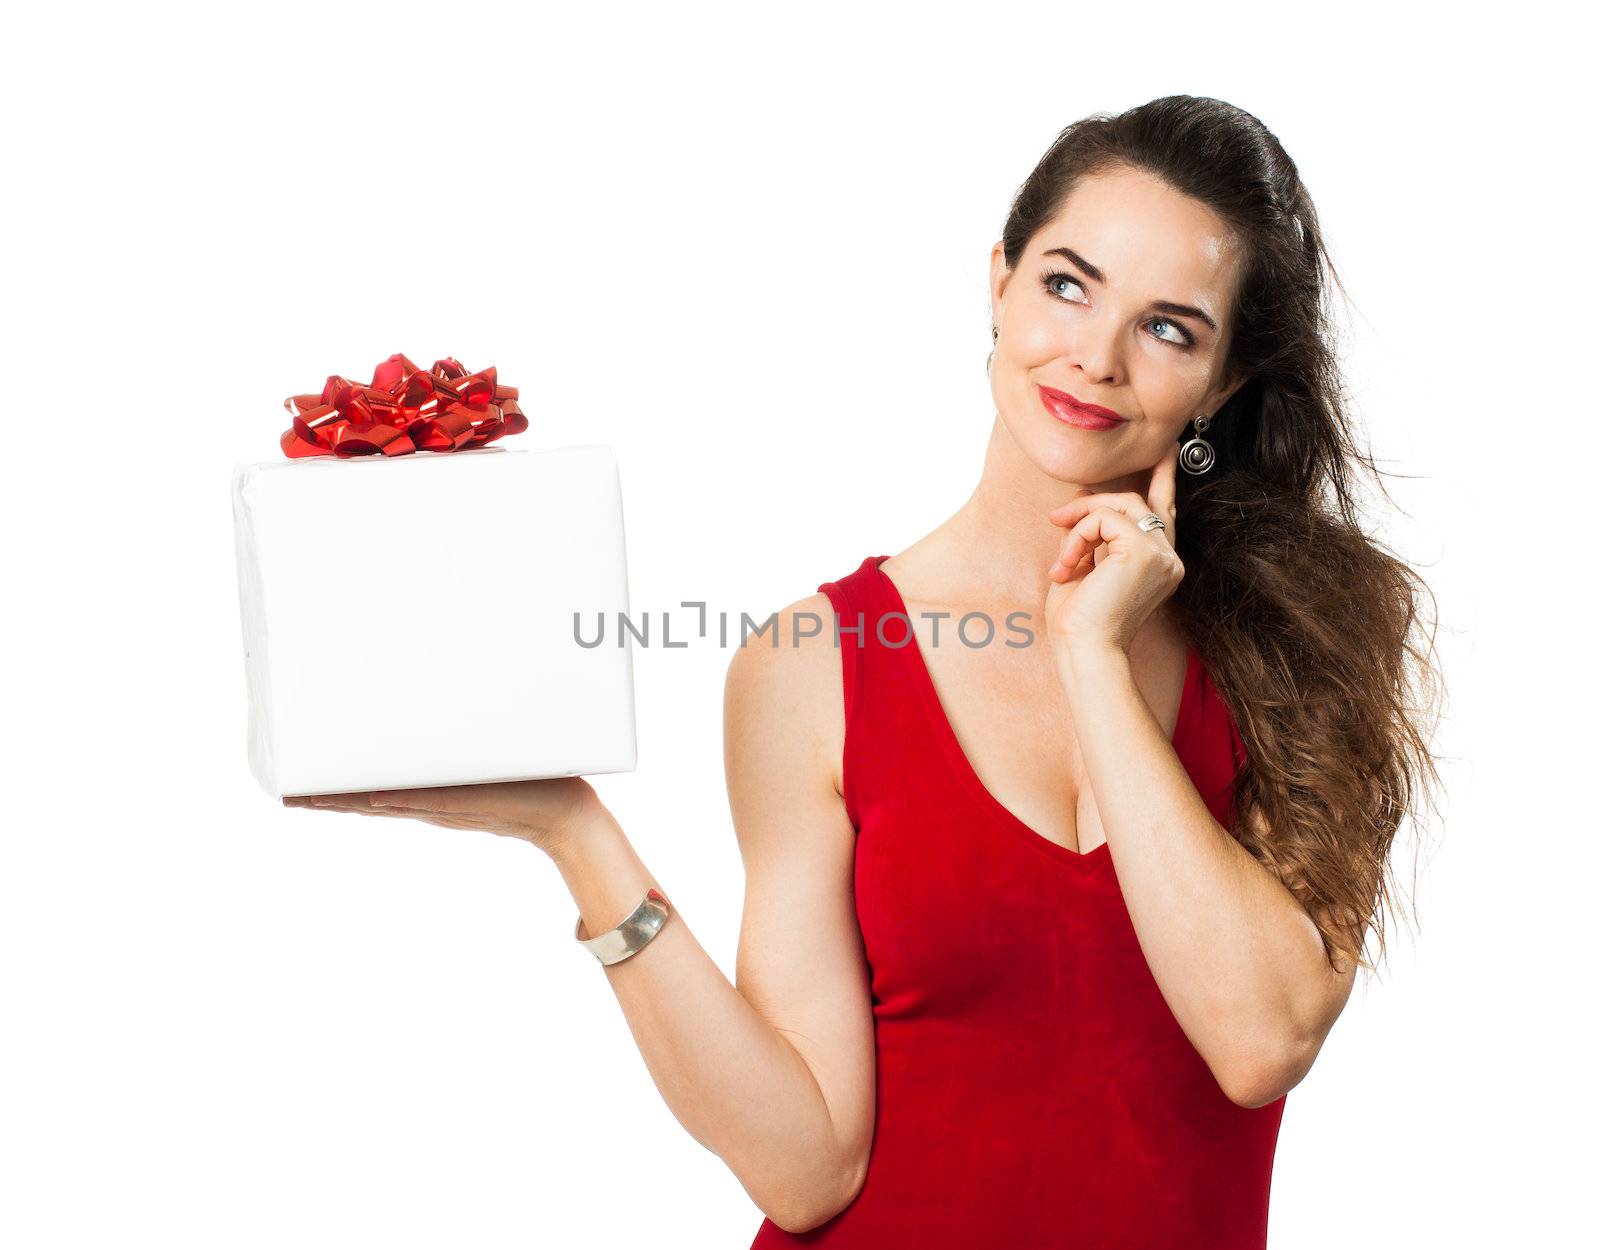 A beautiful woman holding up a beautiful gift and looks thoughtful. Isolated on white.